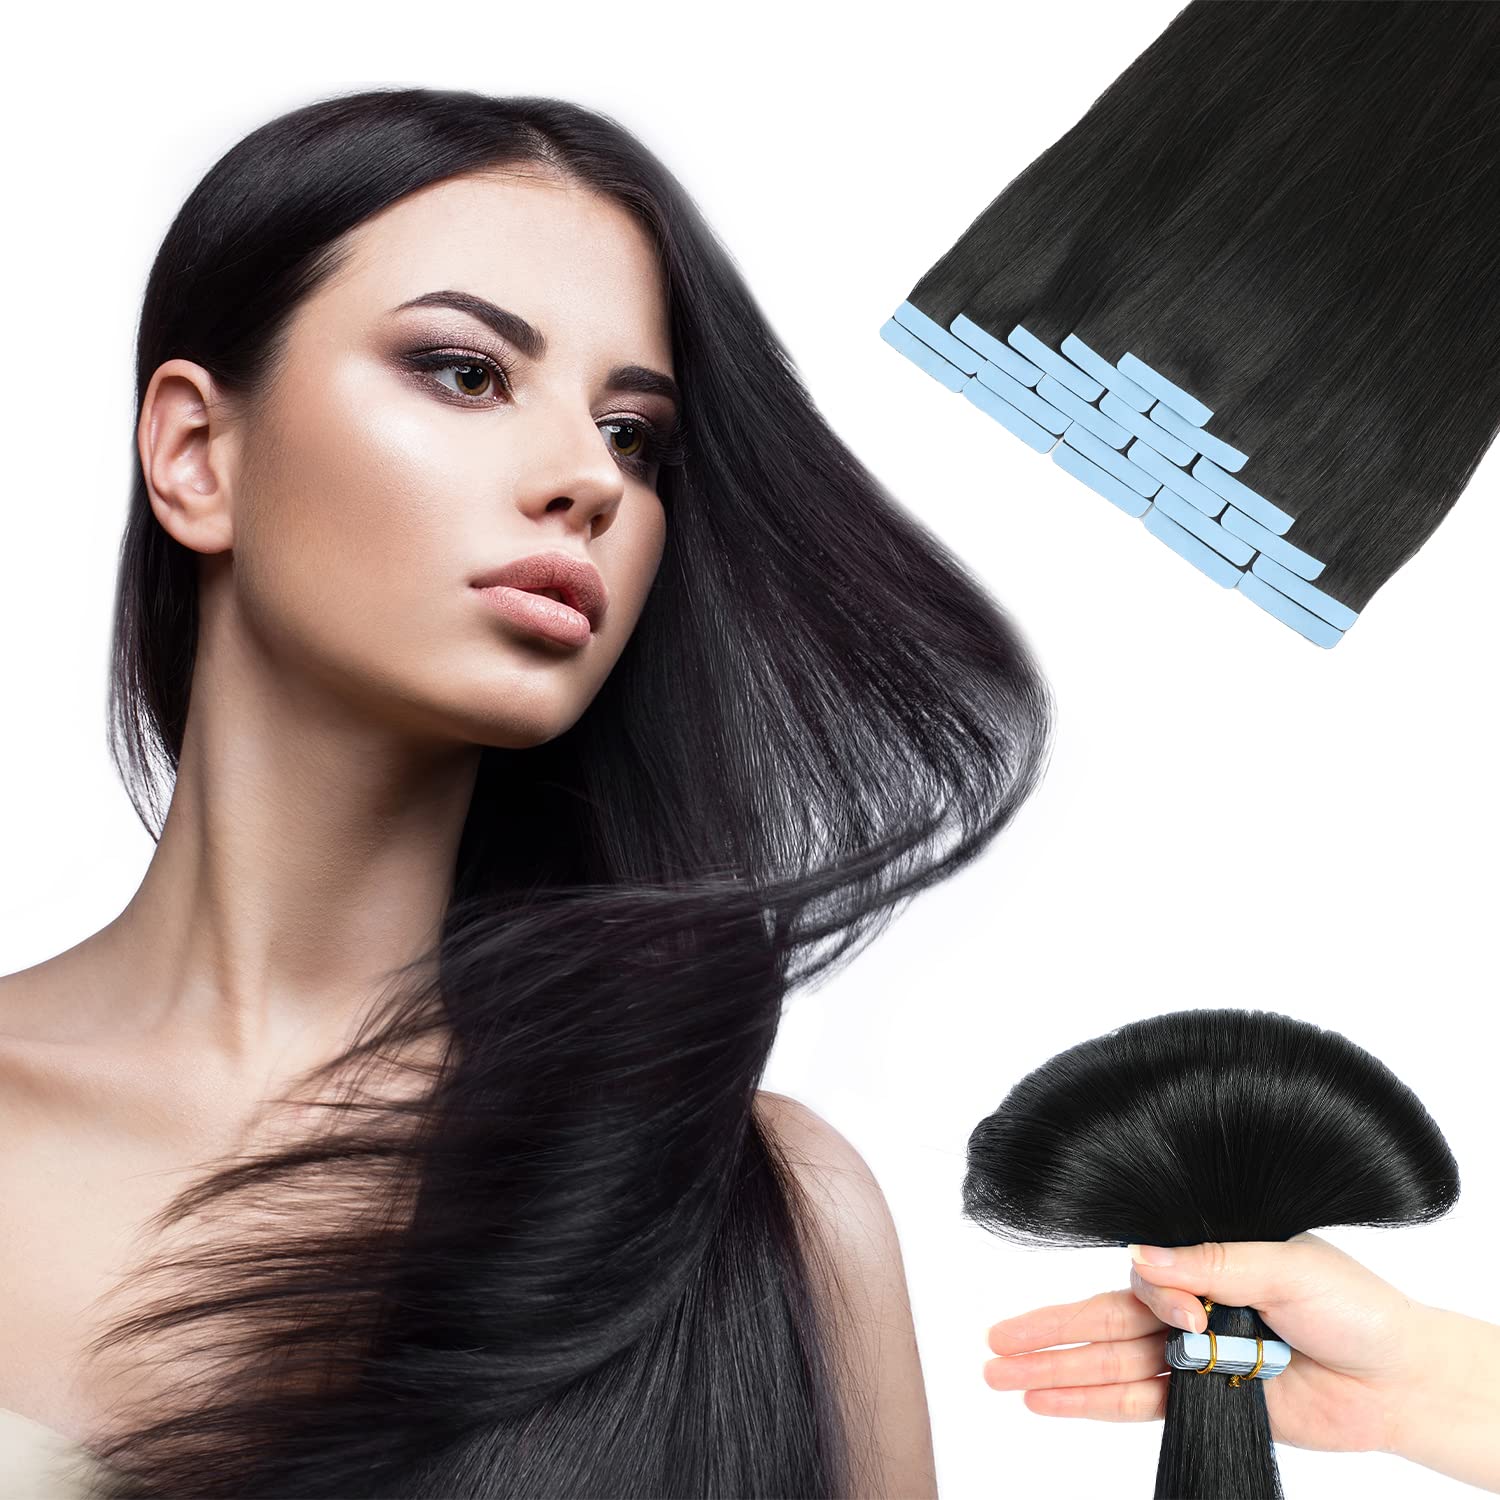 Jerriess Tape in Hair Extensions Human Hair, [...]